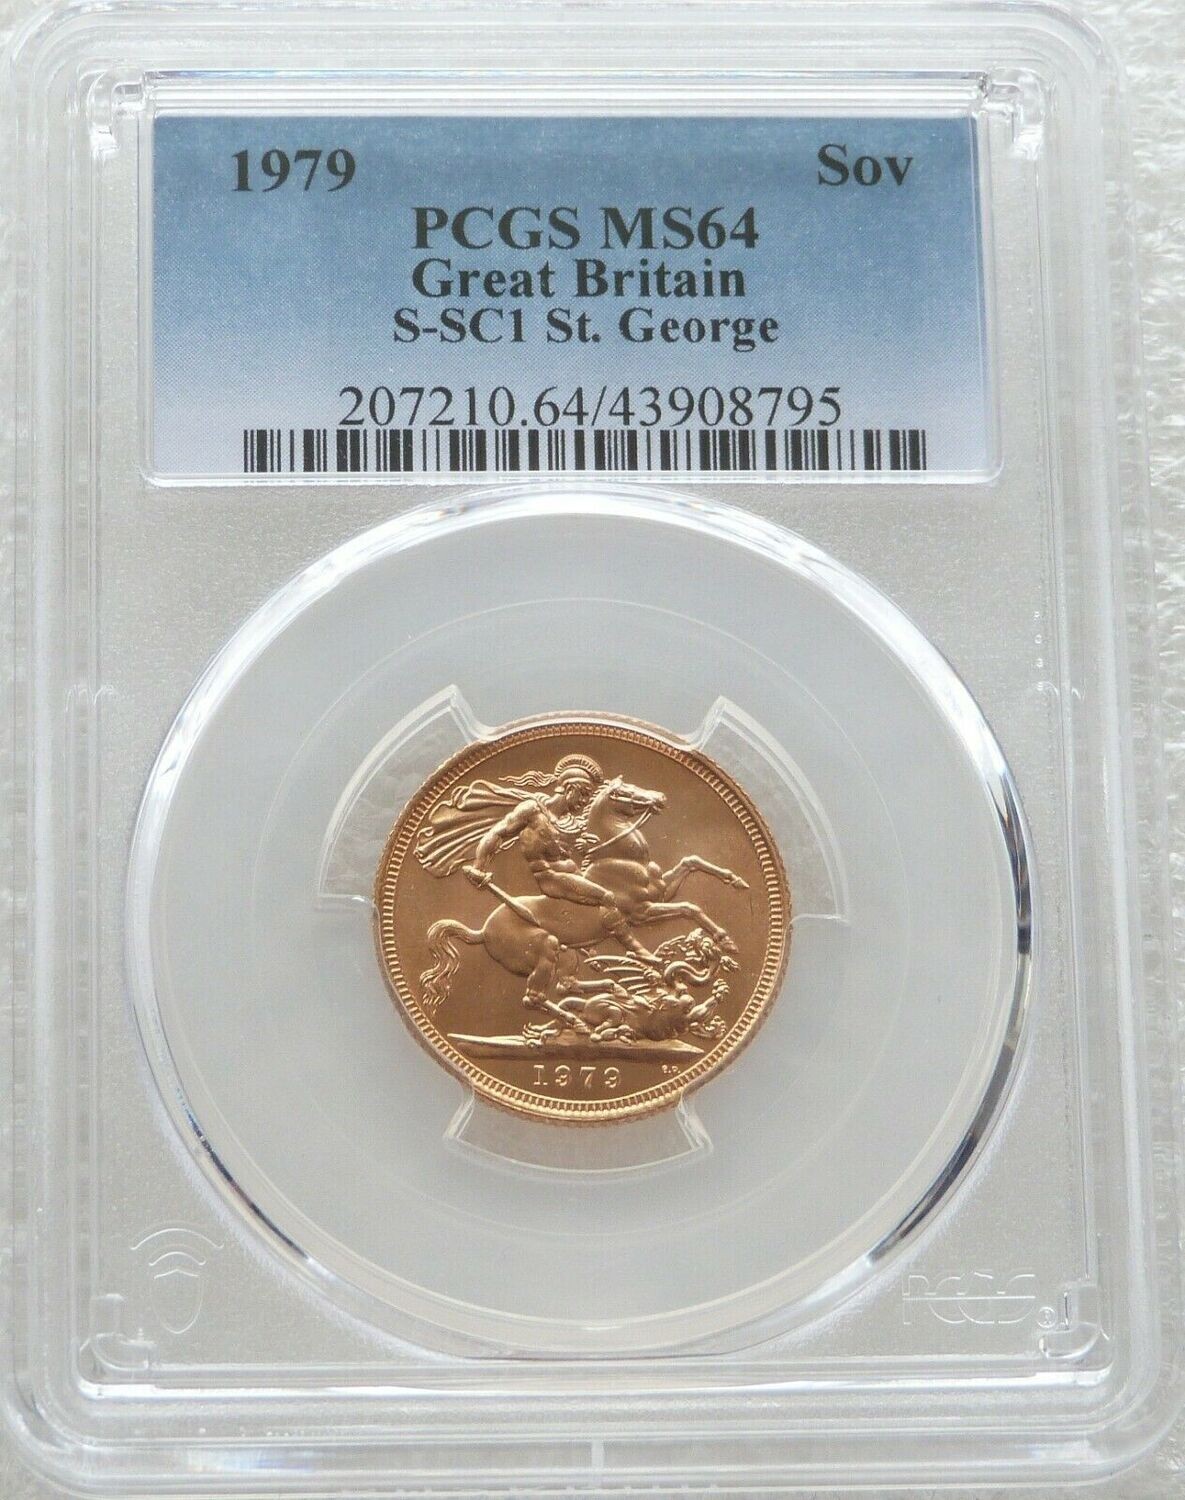 1979 St George and the Dragon Full Sovereign Gold Coin PCGS MS64